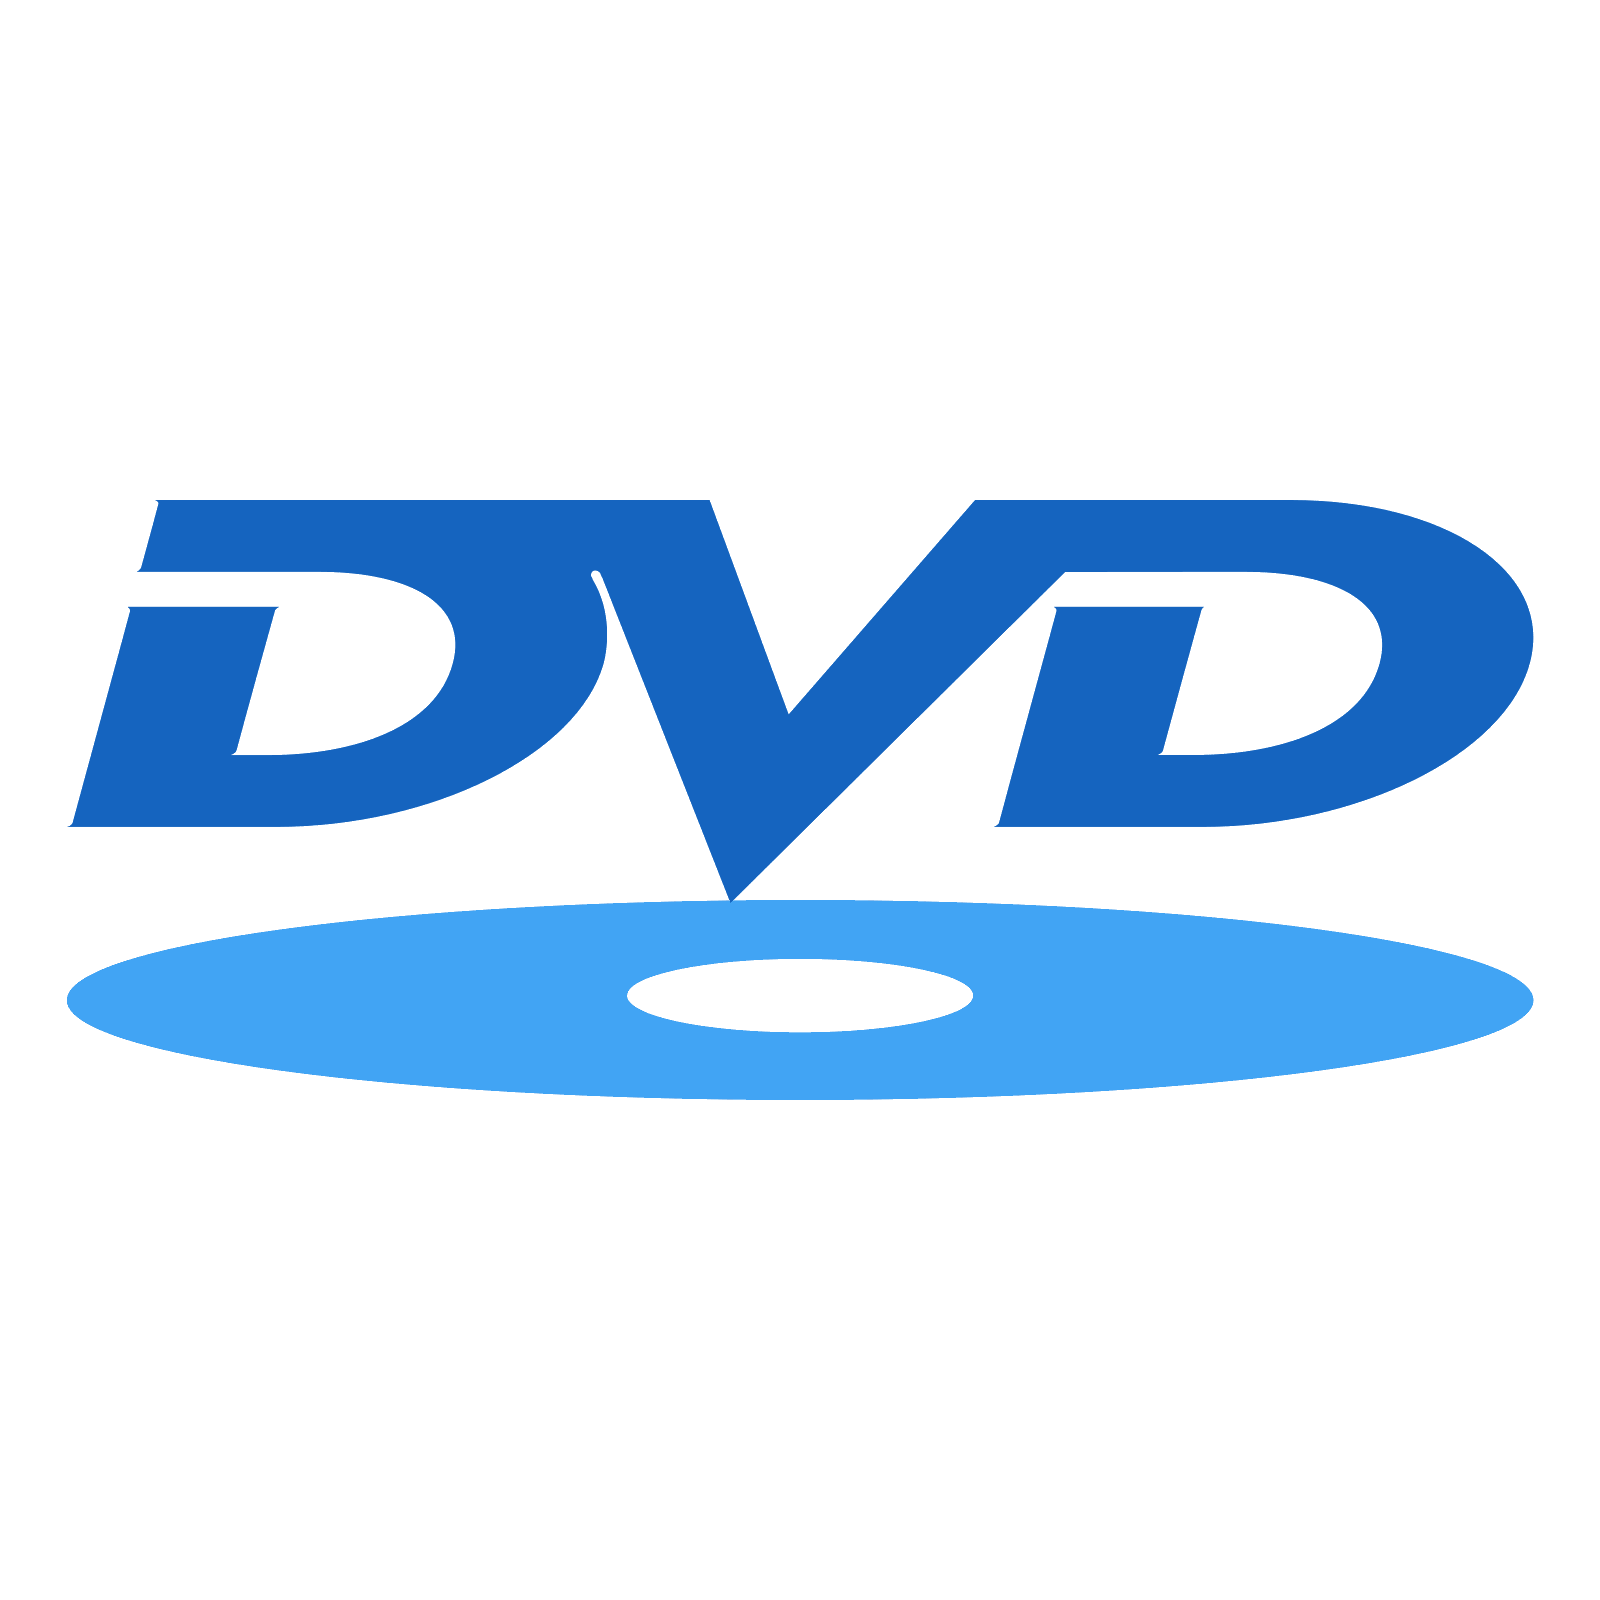 DVD PNG Scarica limmagine